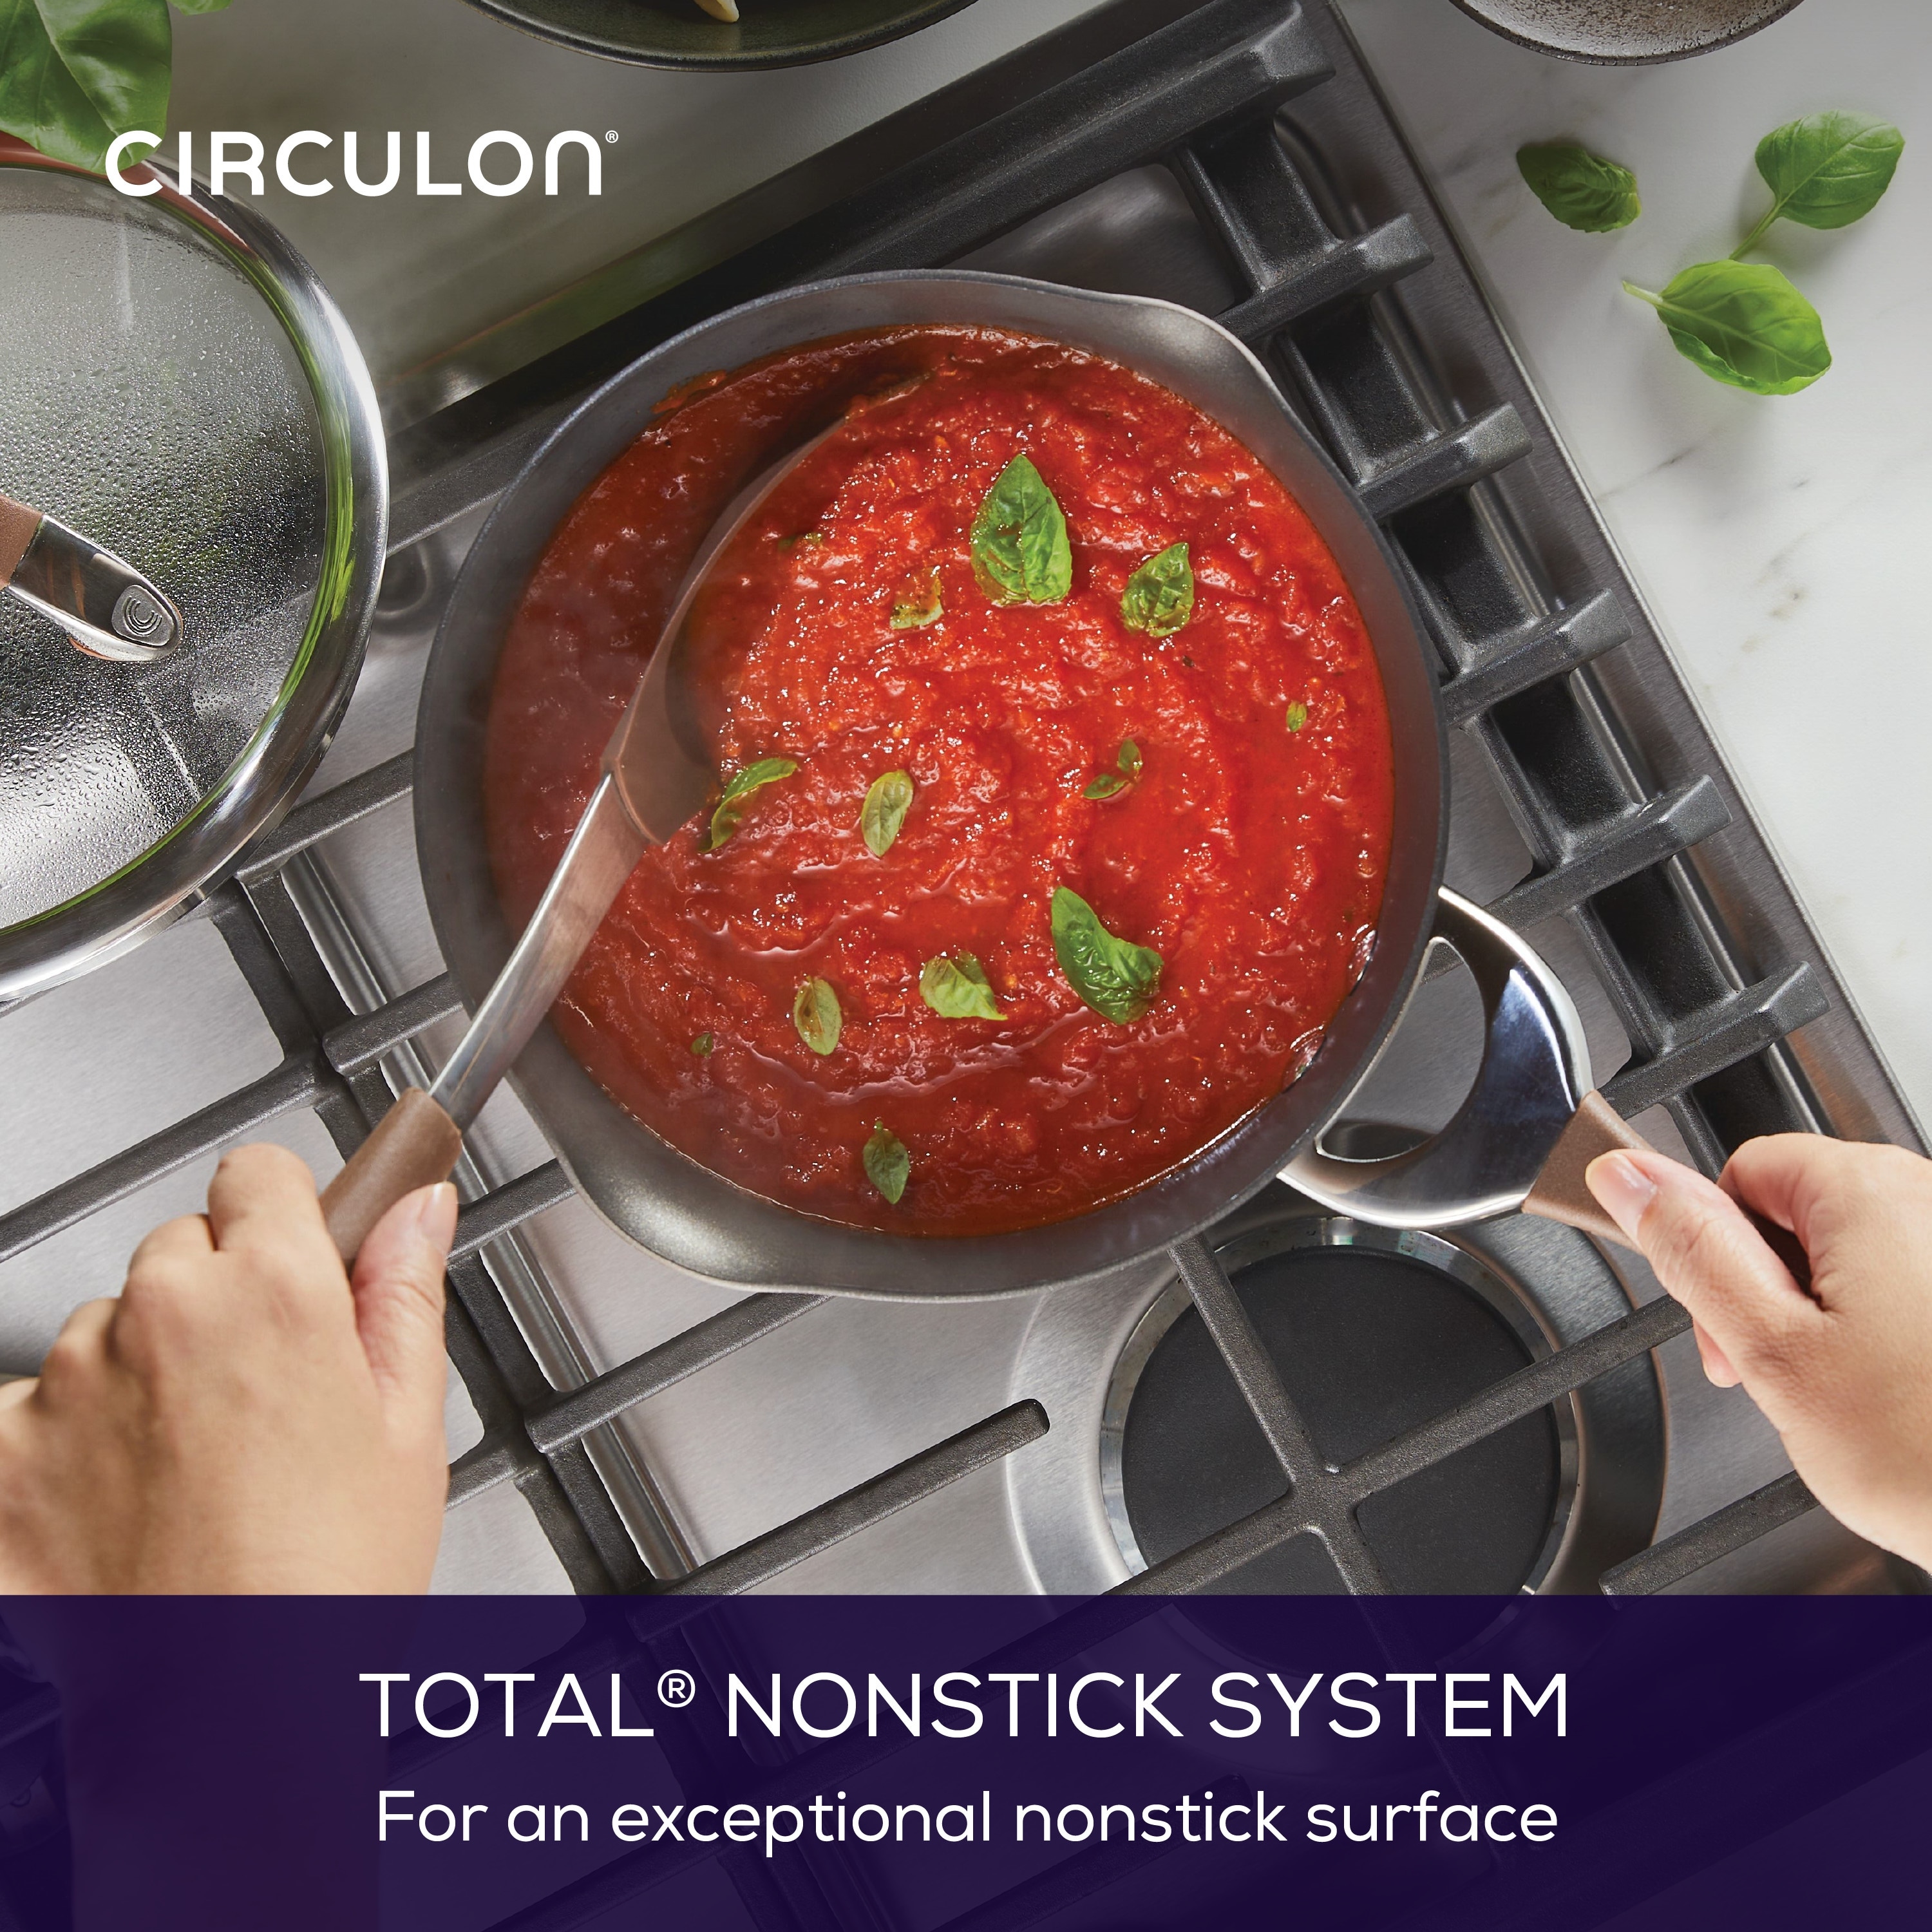 https://ak1.ostkcdn.com/images/products/is/images/direct/99857a680fa1f3d8e46205d5fd2c915ec981fd05/Circulon-Symmetry-Hard-Anodized-Nonstick-Induction-Straining-Sauce-Pan-with-Lid%2C-3.5-Quart%2C-Chocolate.jpg